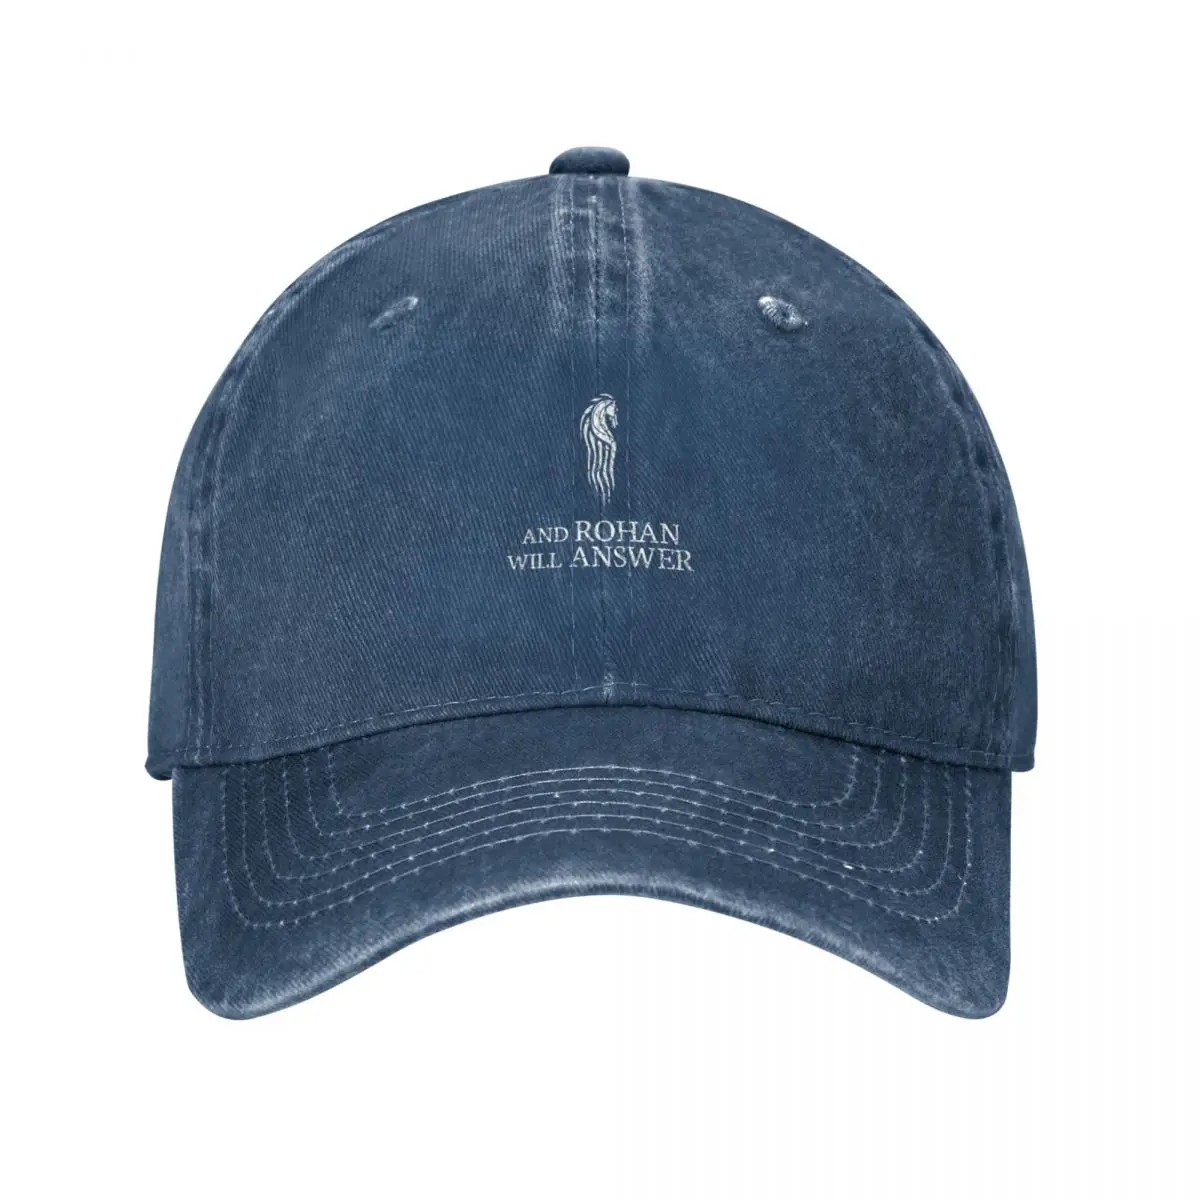 

Gondor Calls for aid and Rohan Will Answer Baseball Cap Caps New In The Hat Women Caps Men'S